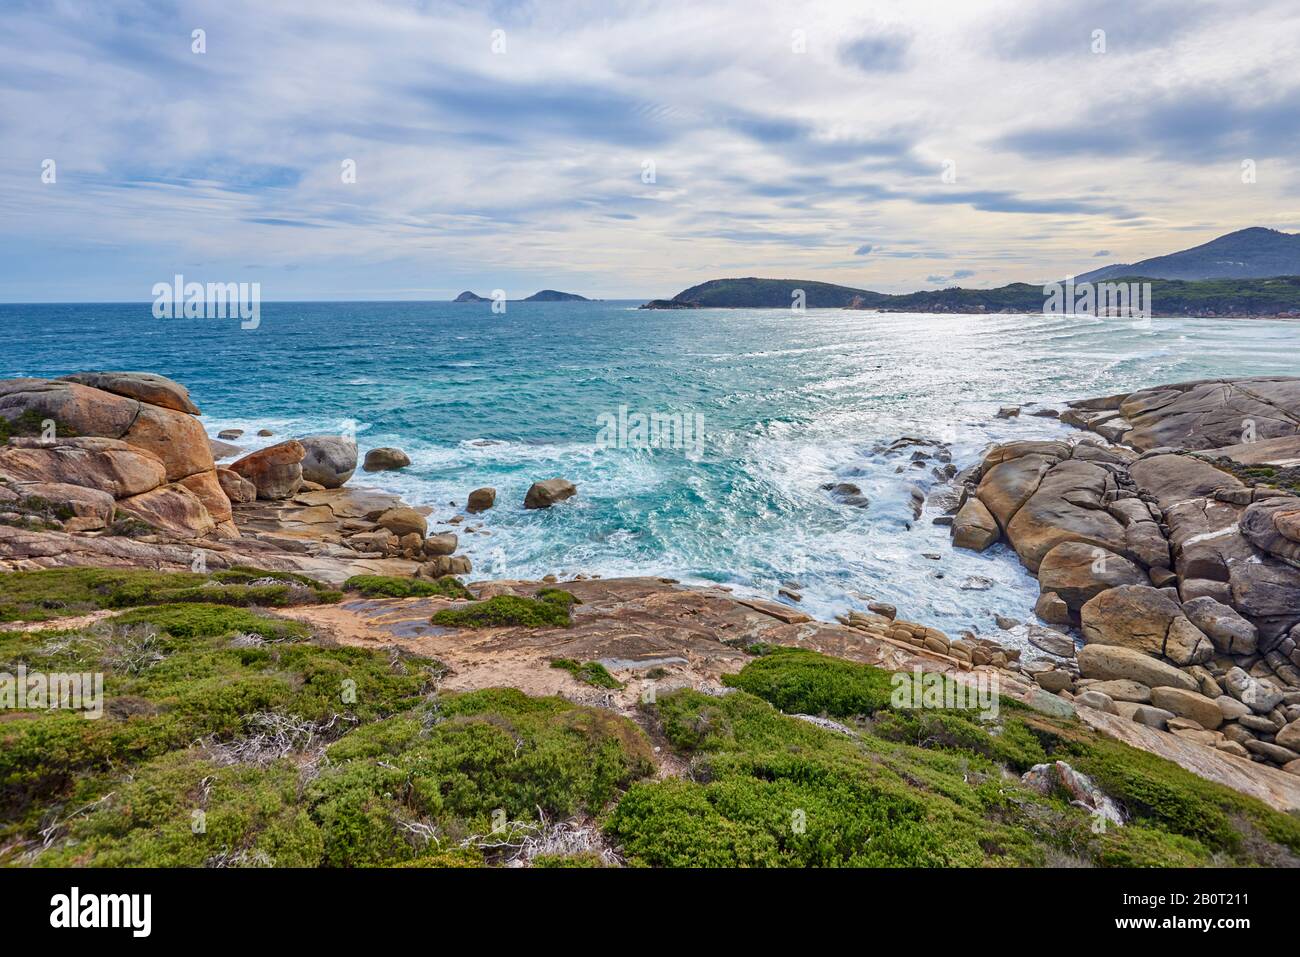 landscape at Squeaky Beach, Australia, Victoria, Wilsons Promontory National Park Stock Photo